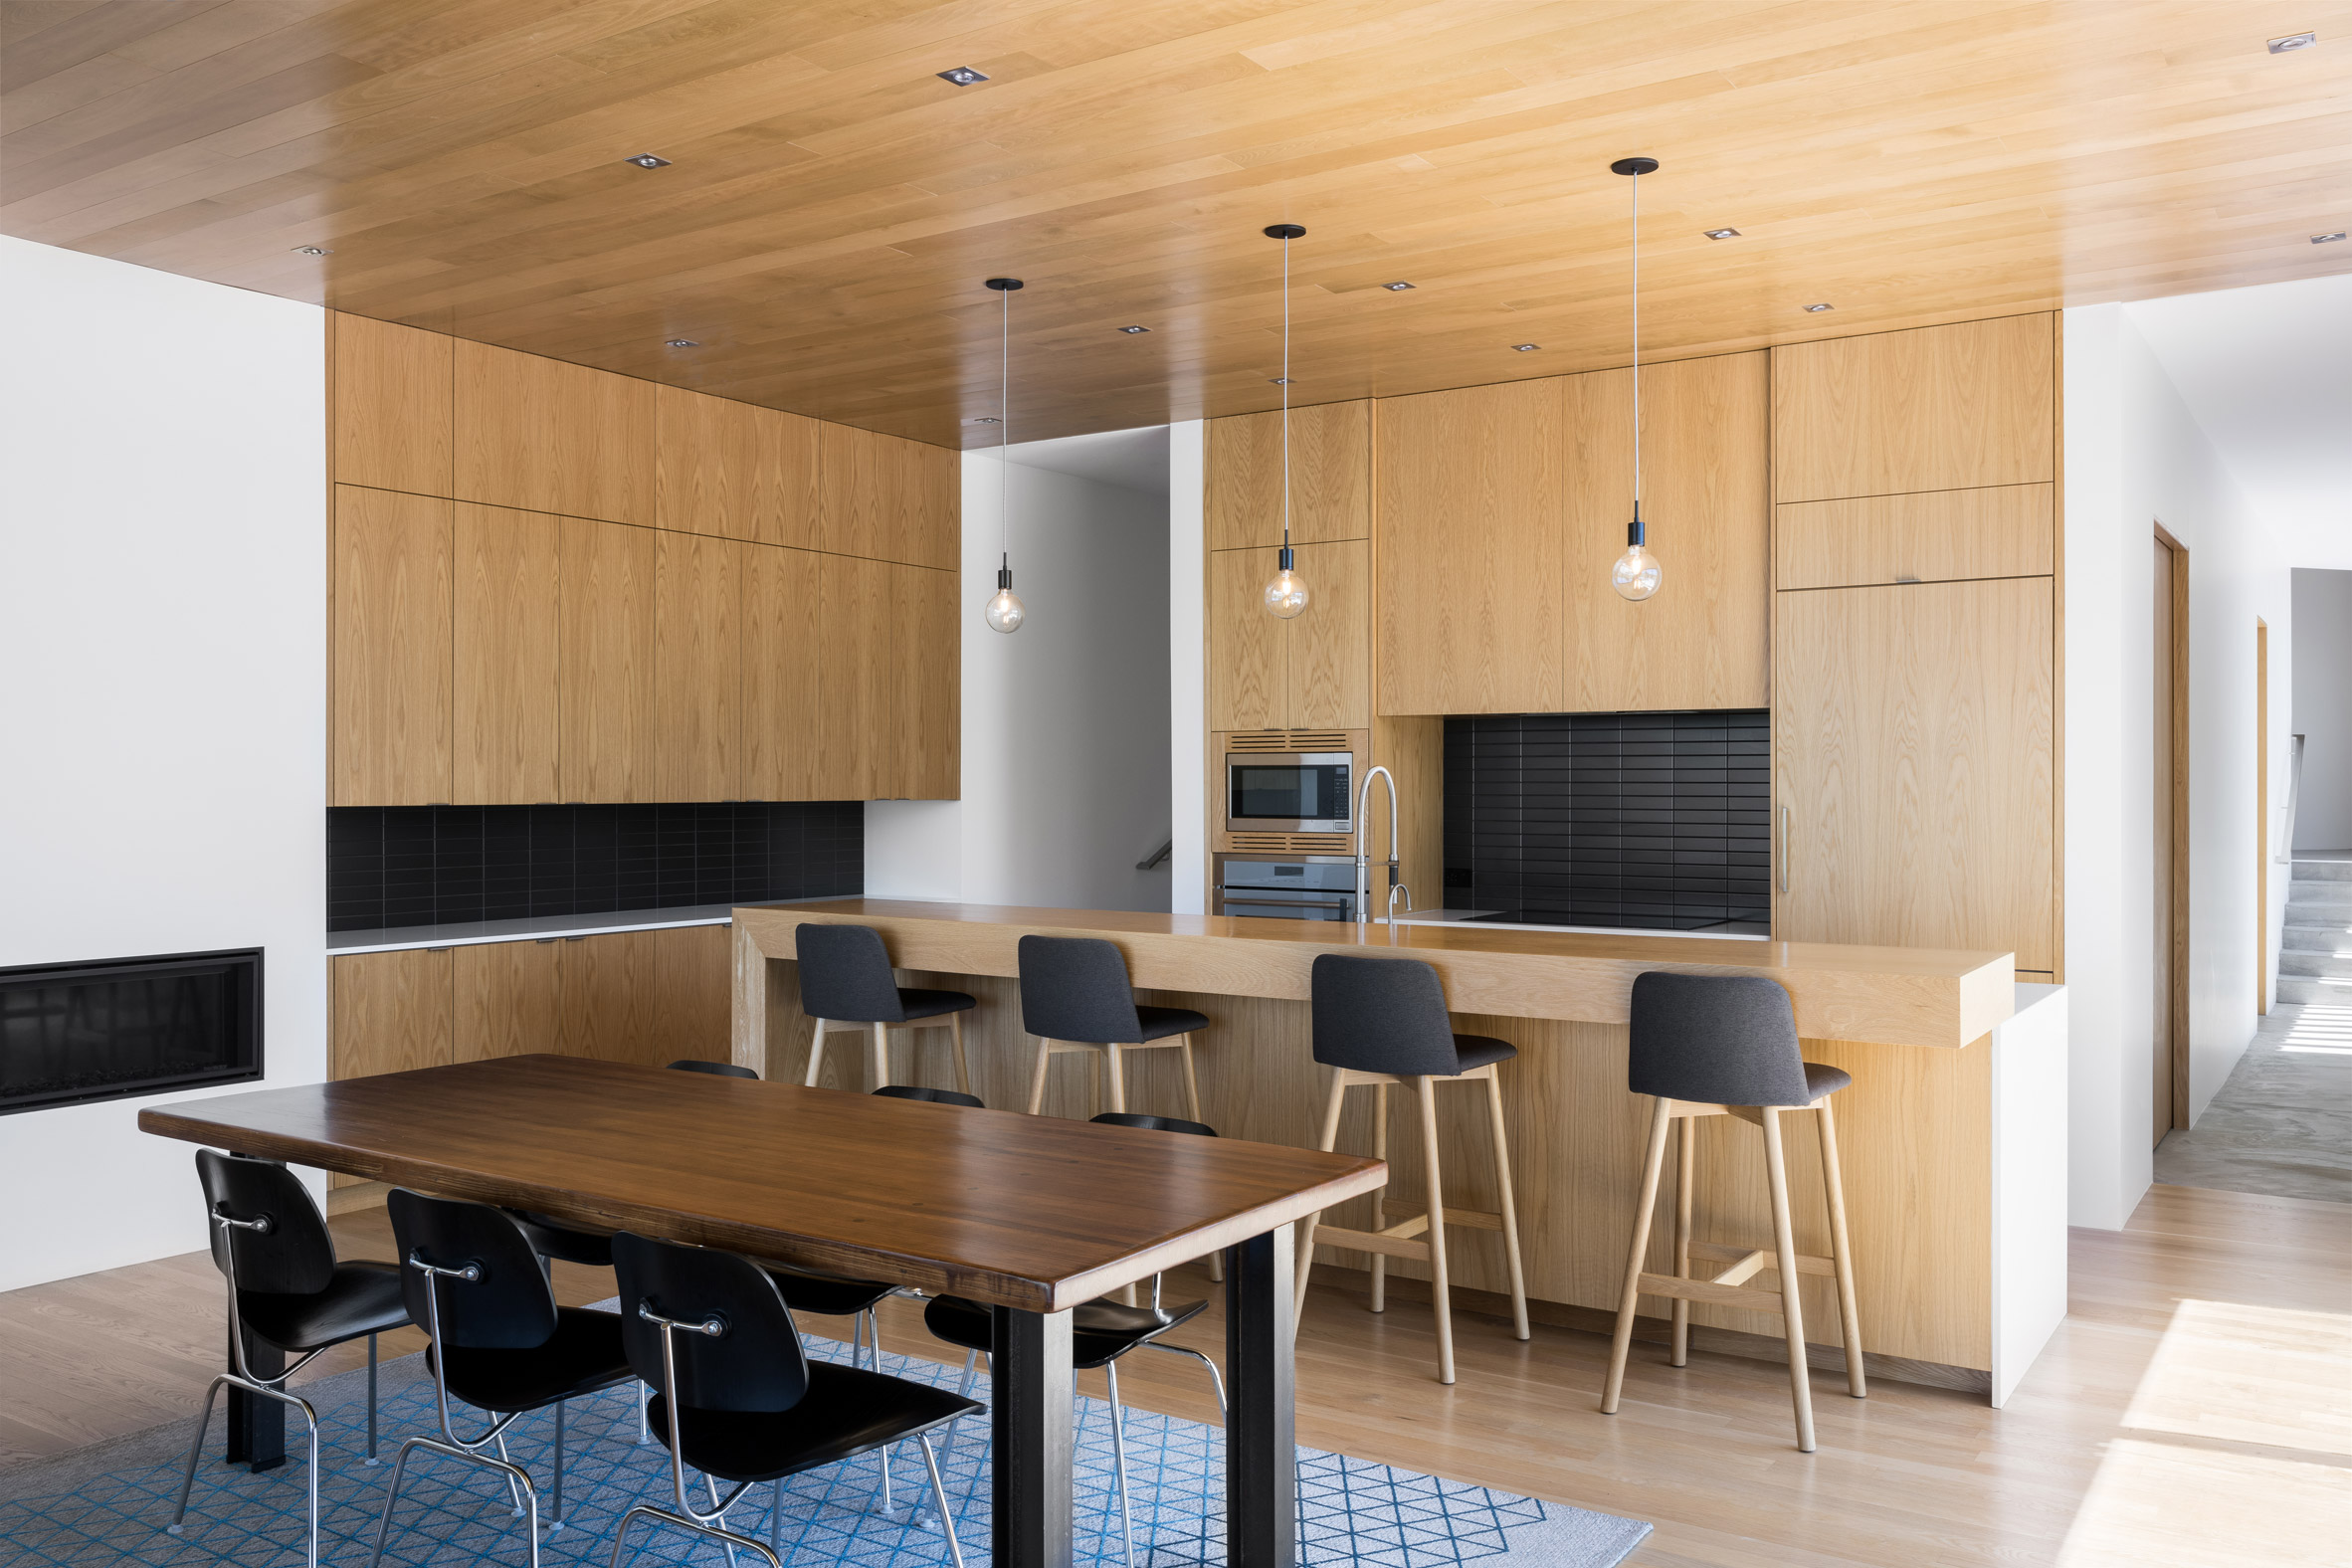 Light timber-clad kitchen interior with geometric cabinetry